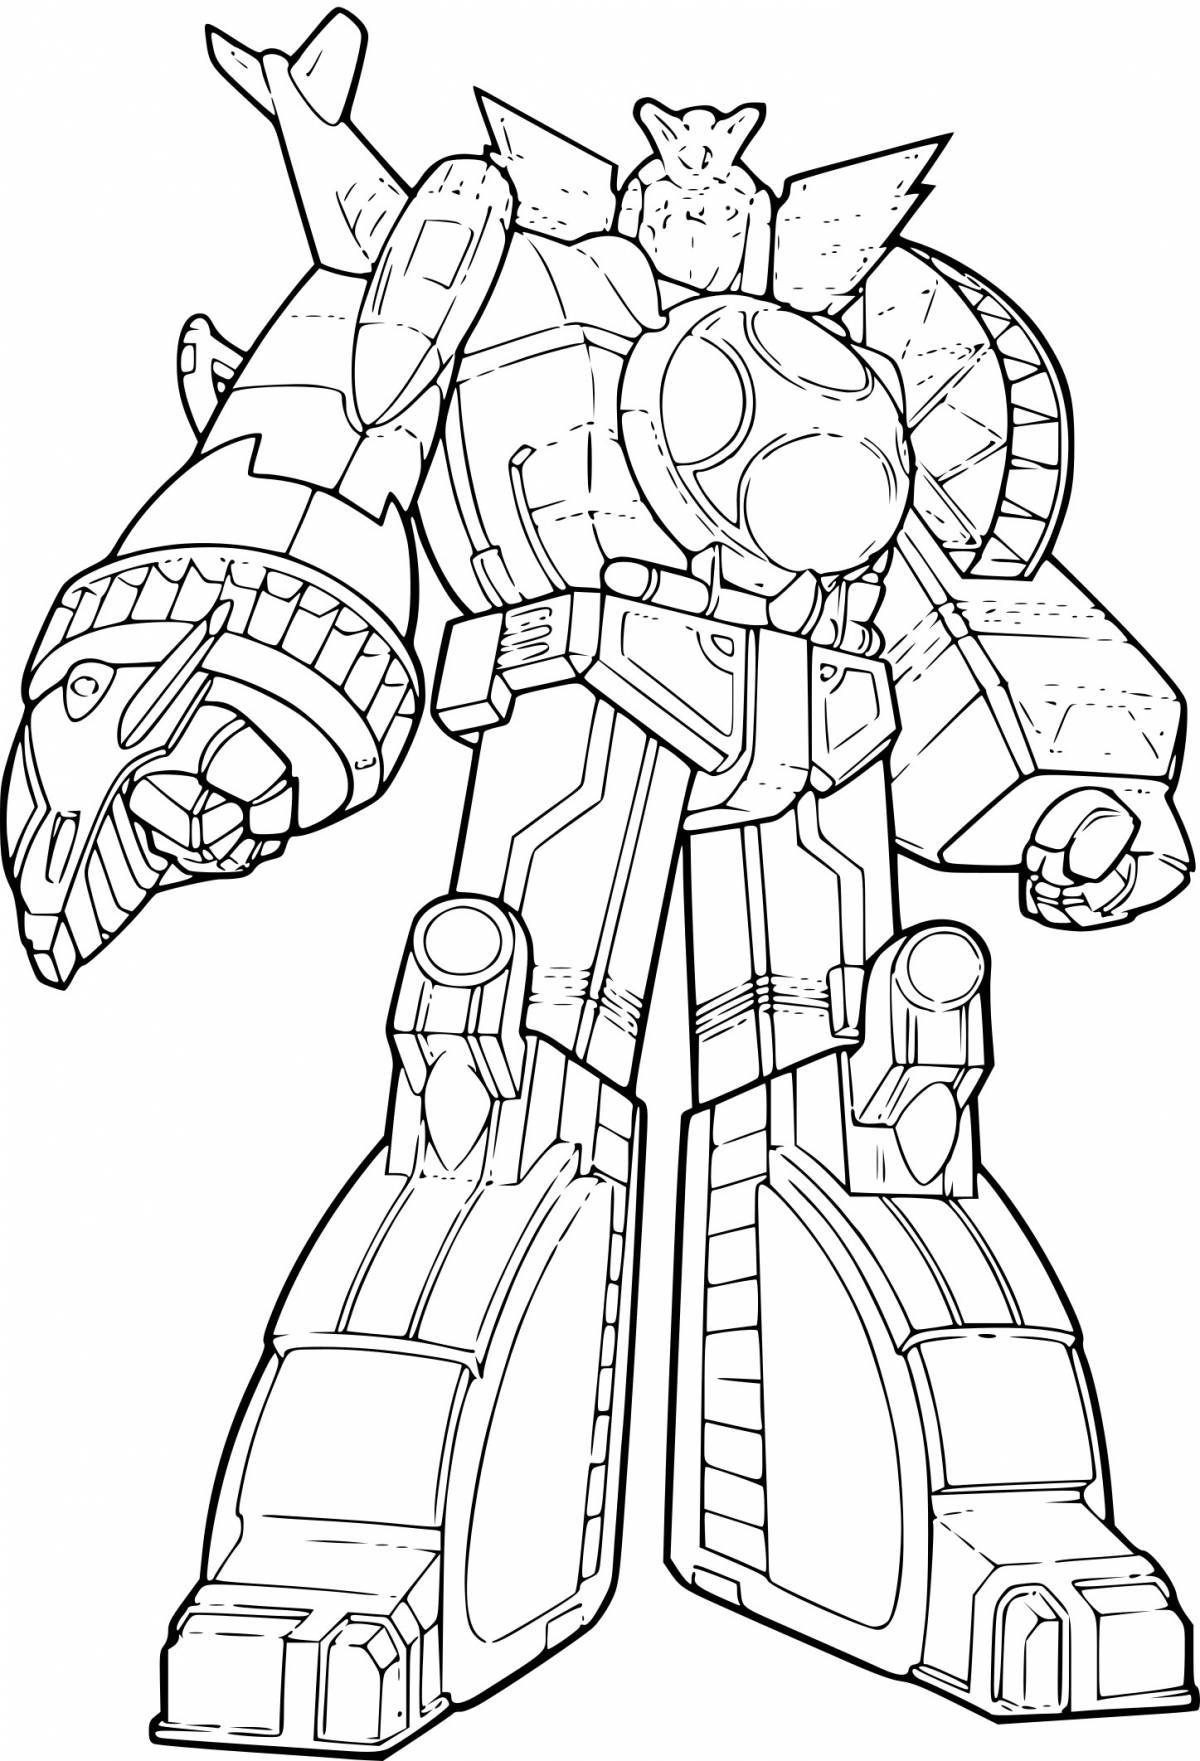 Playful robot coloring page for 6-7 year olds